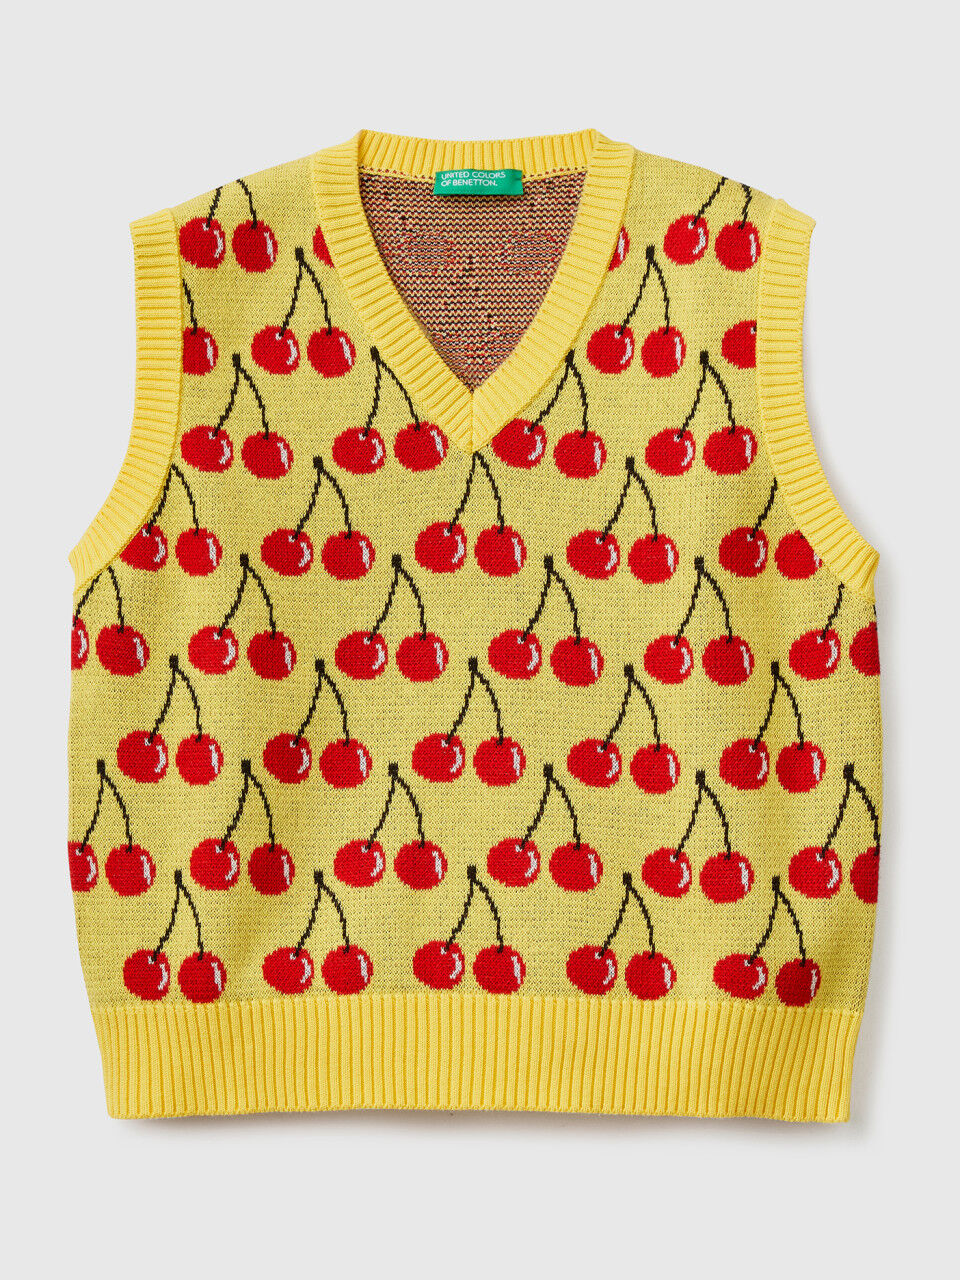 Yellow vest with cherry pattern